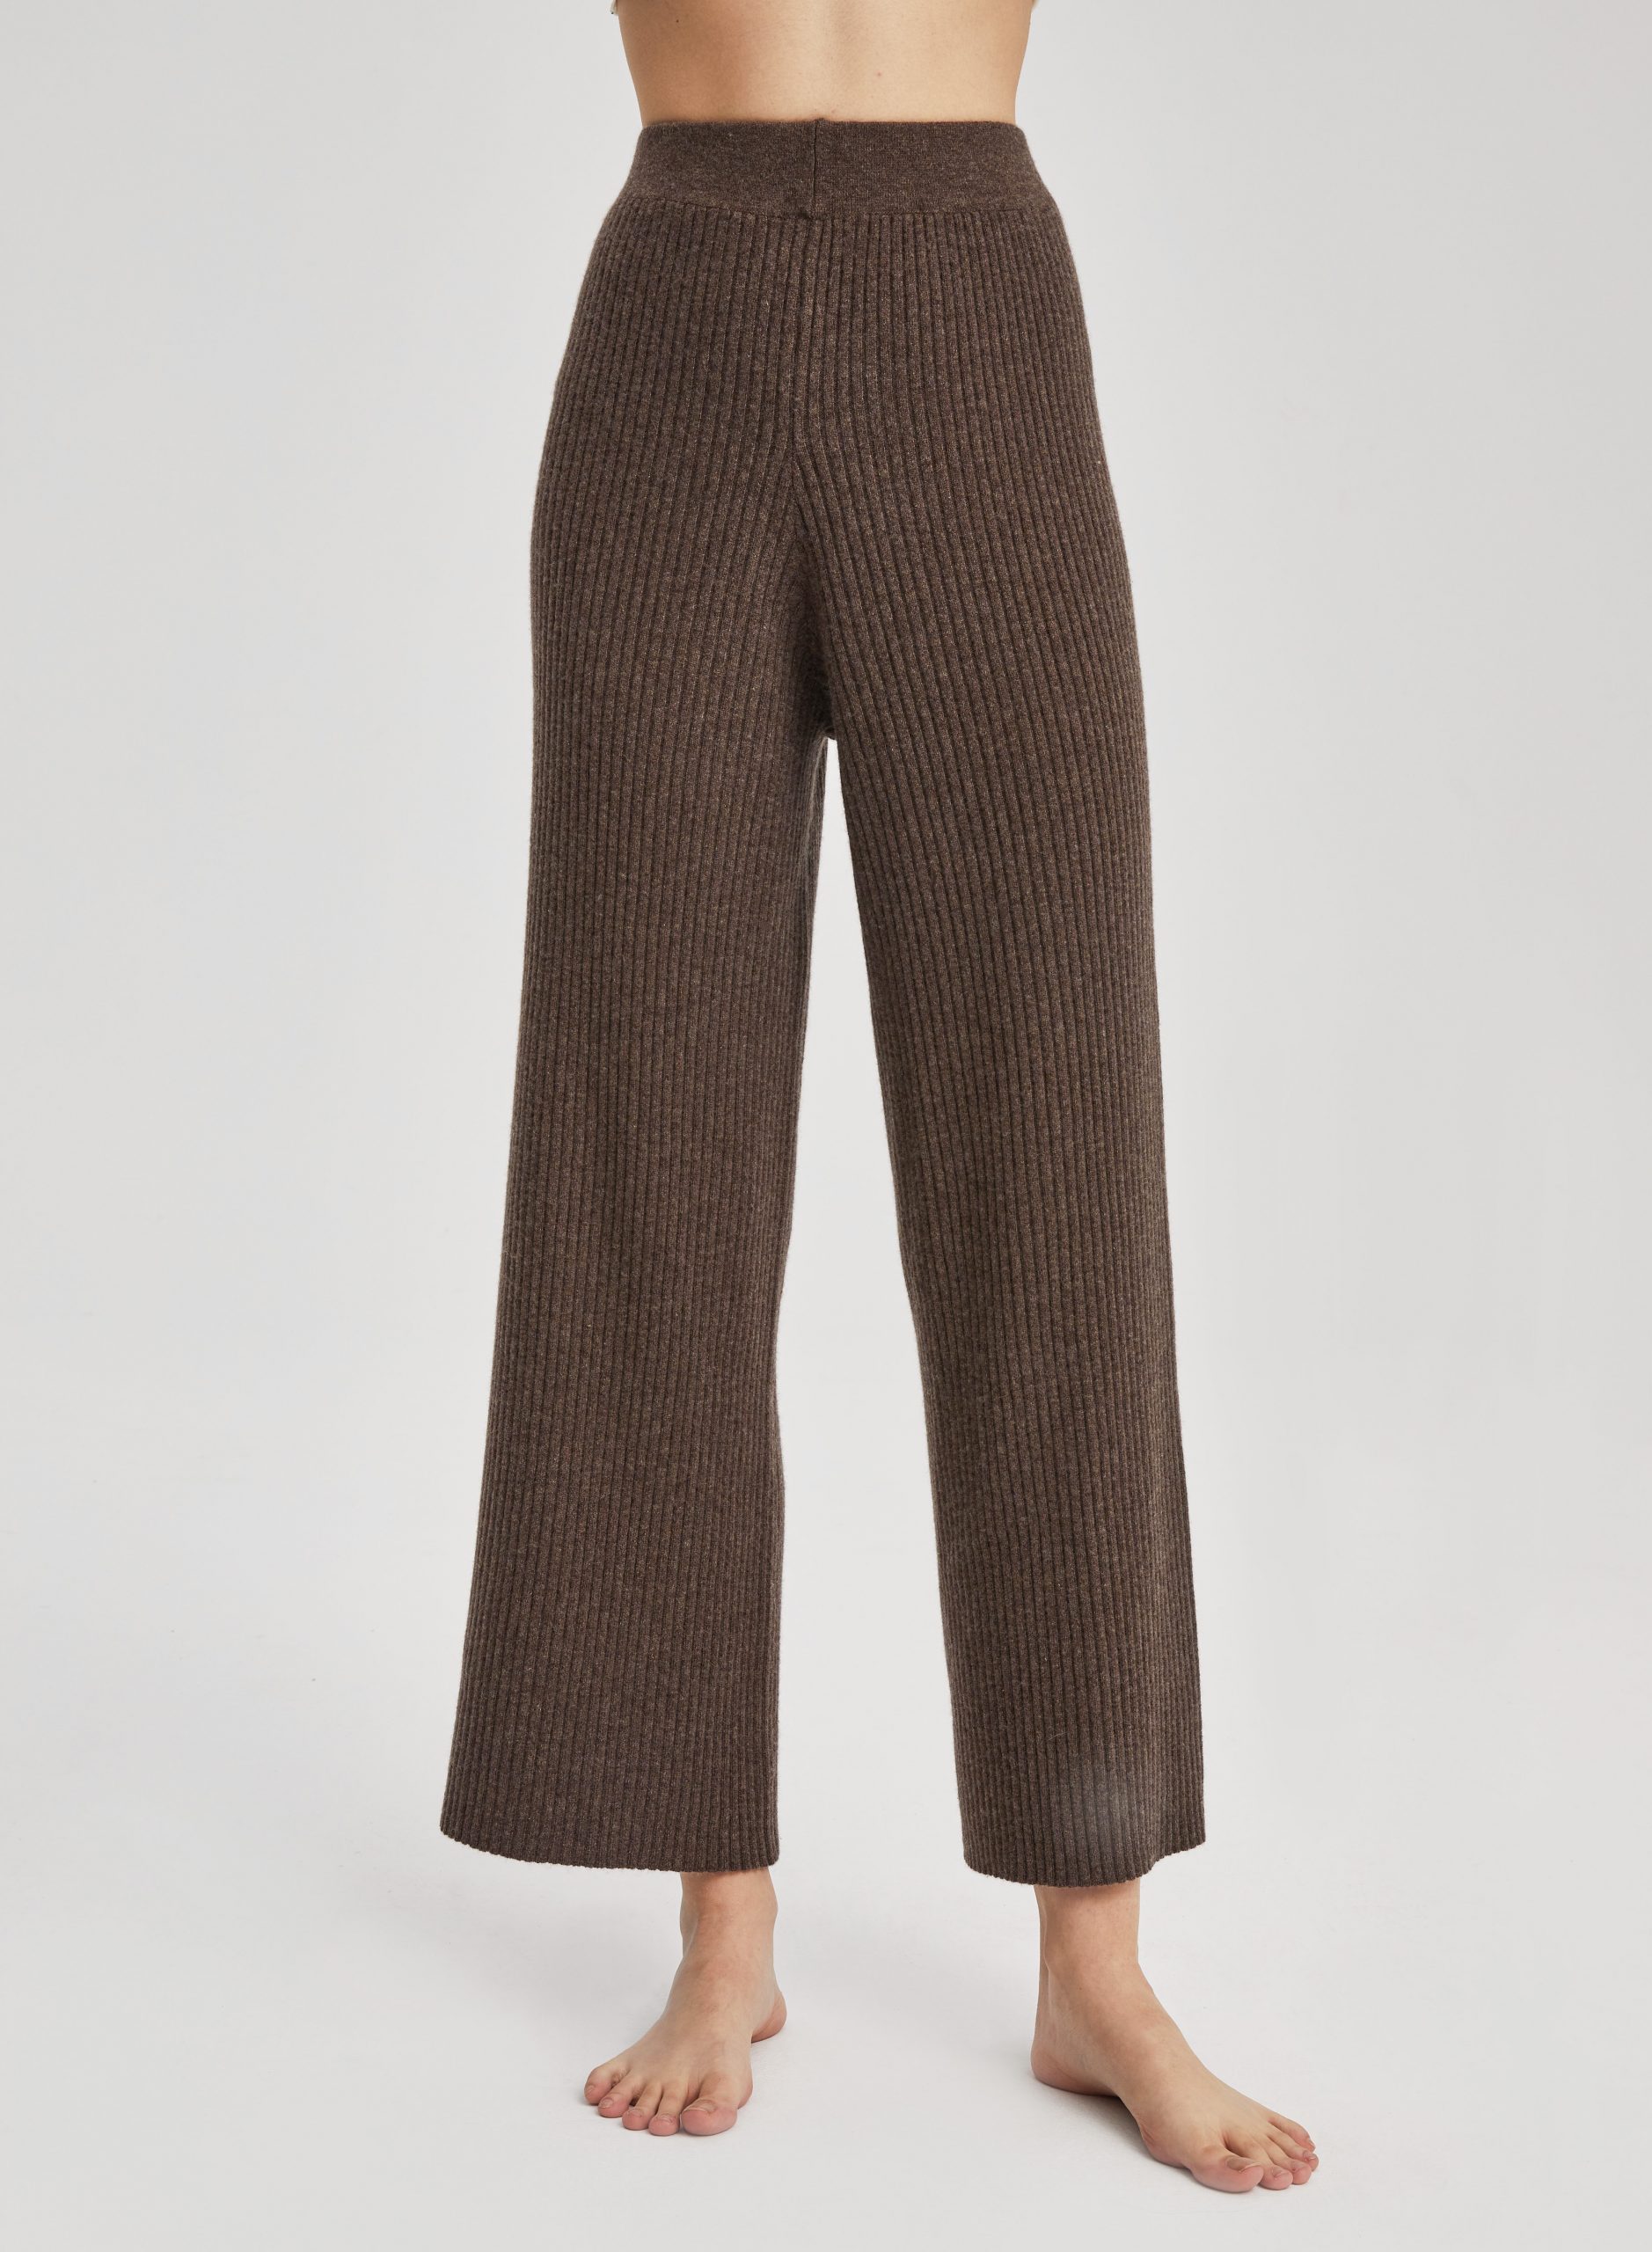 Buy Ribbed Knit Fabric Pants with Elasticated Waistband